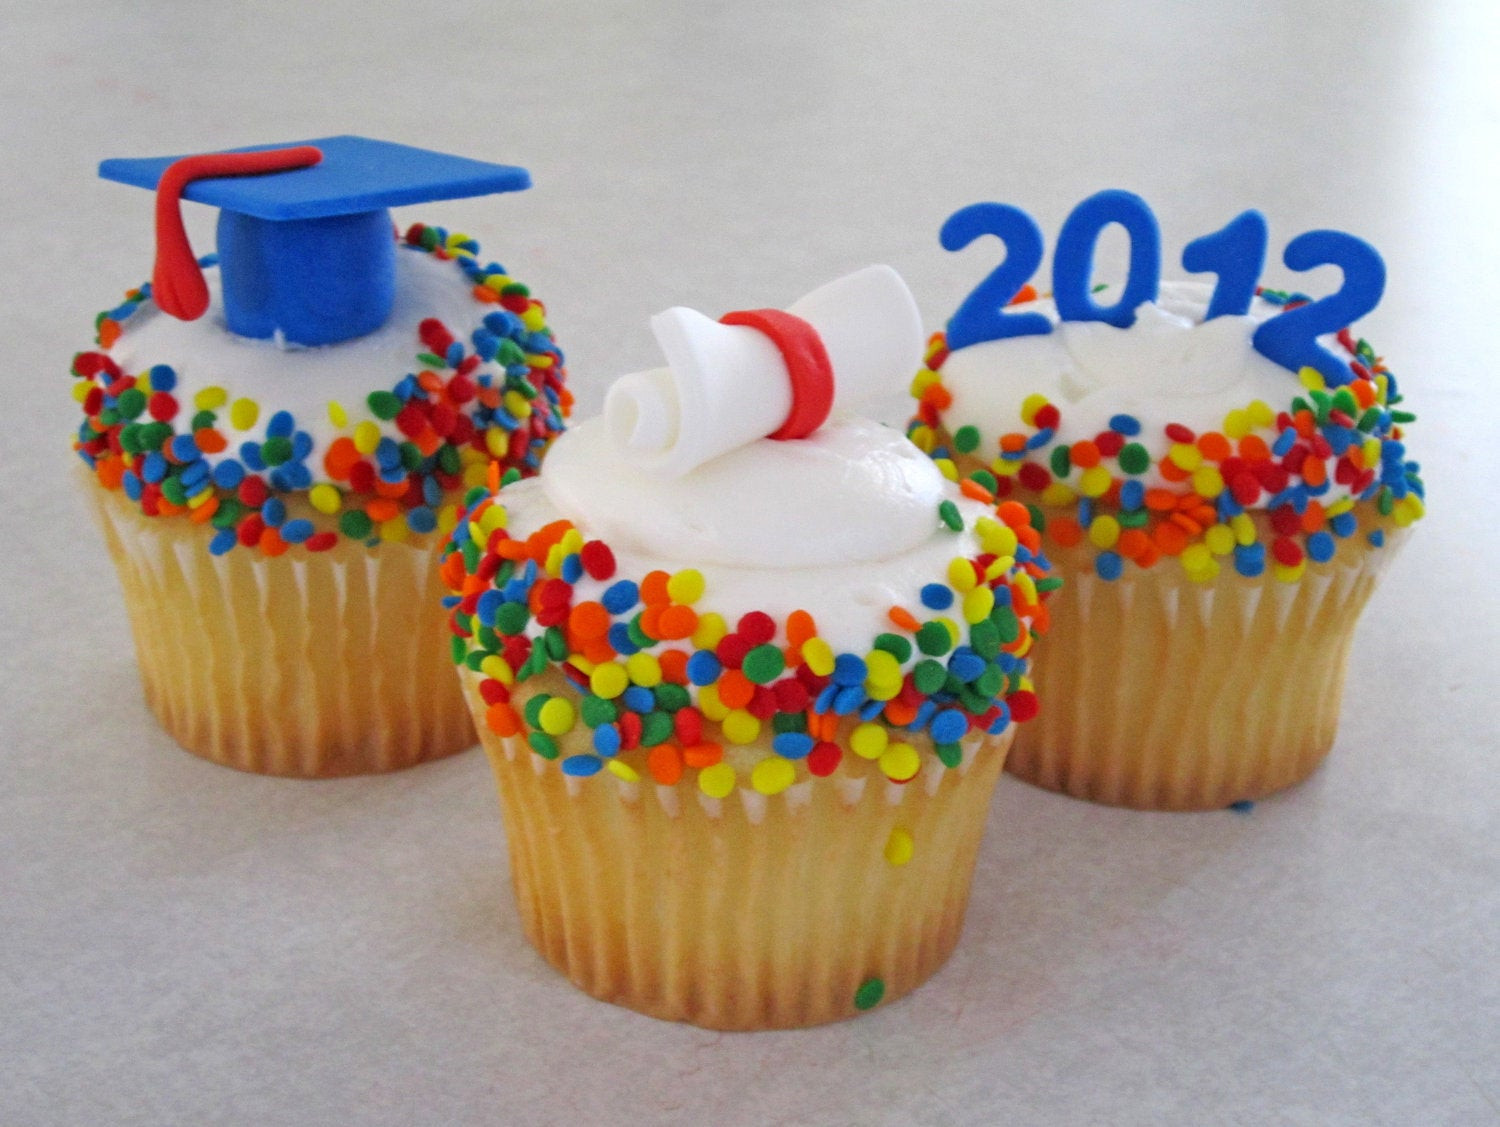 Graduation Party Cupcake Ideas
 High School College Gradutaion cupcake toppers by